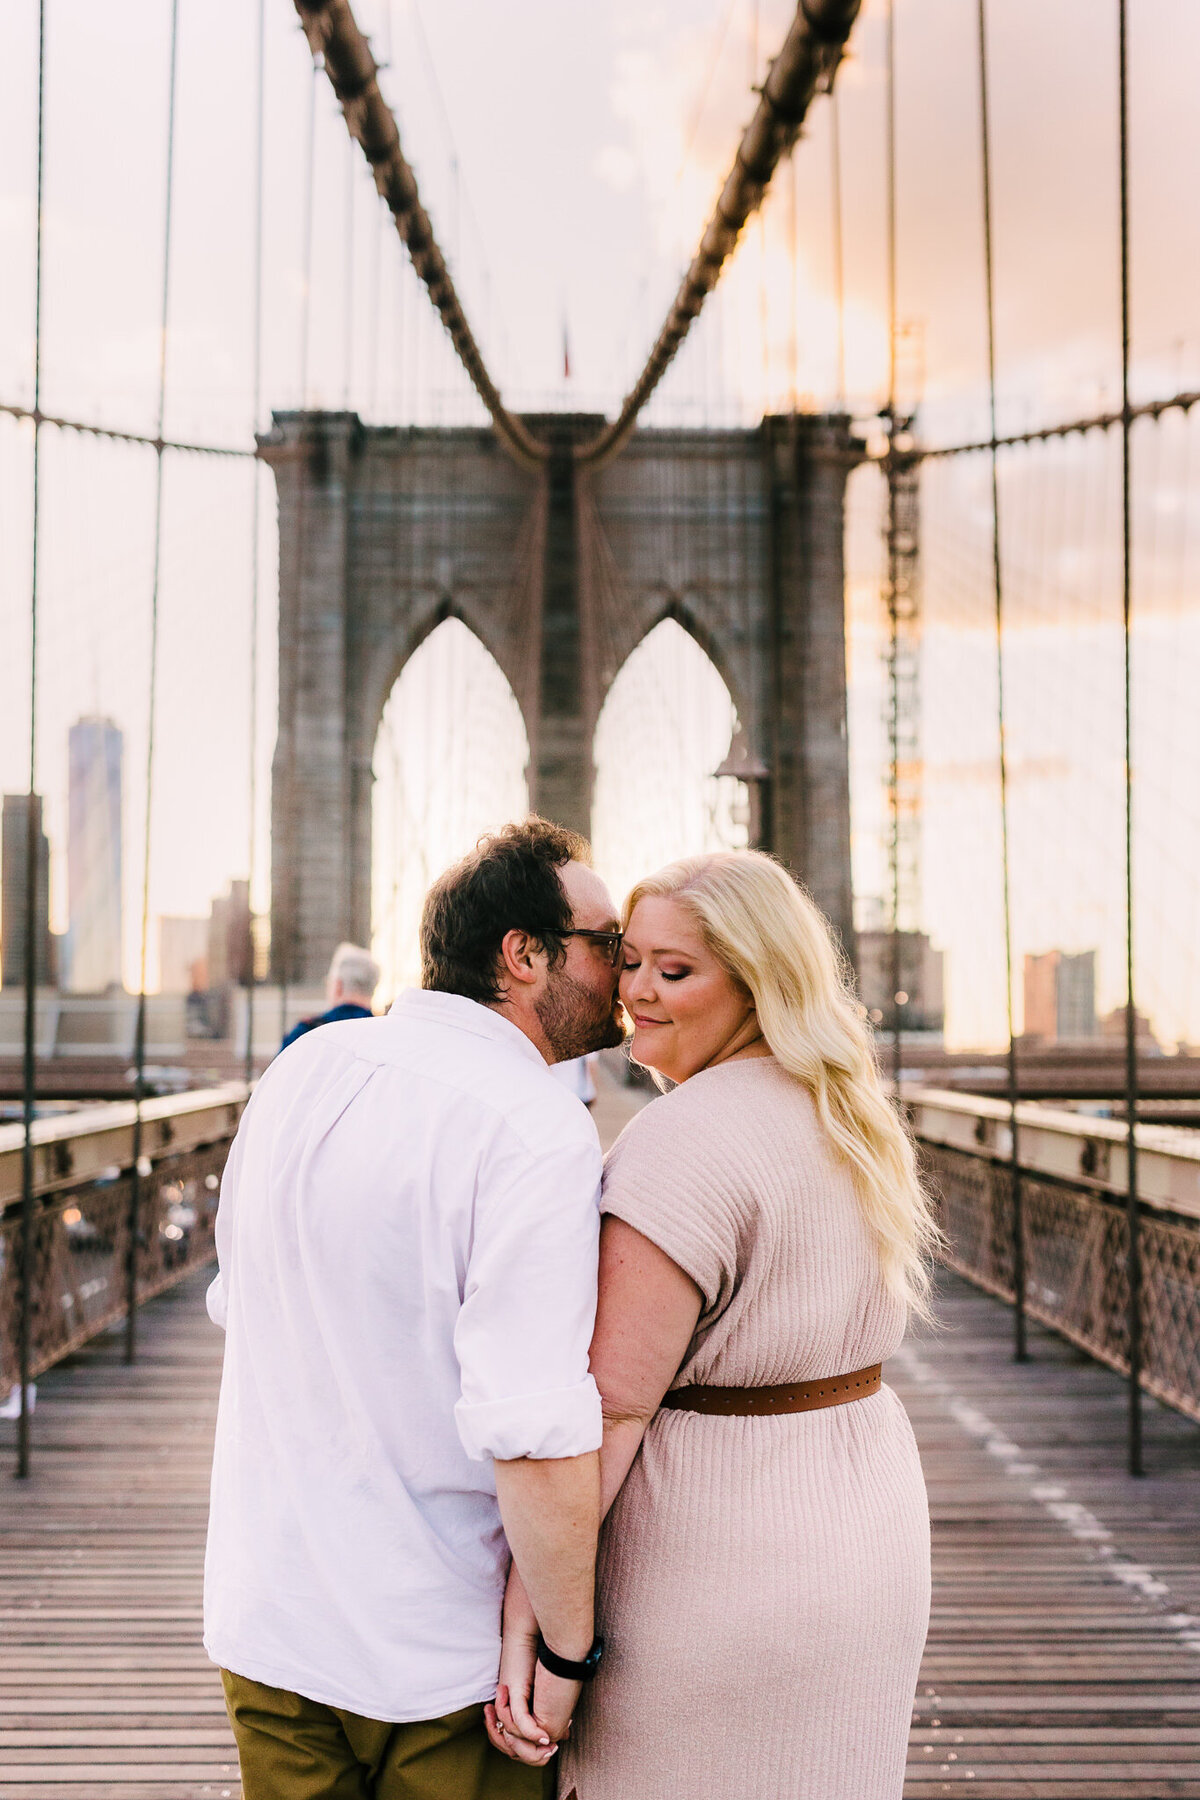 sunset-dumbo-brooklyn-engagement-photos-rebecca-renner-photography-8